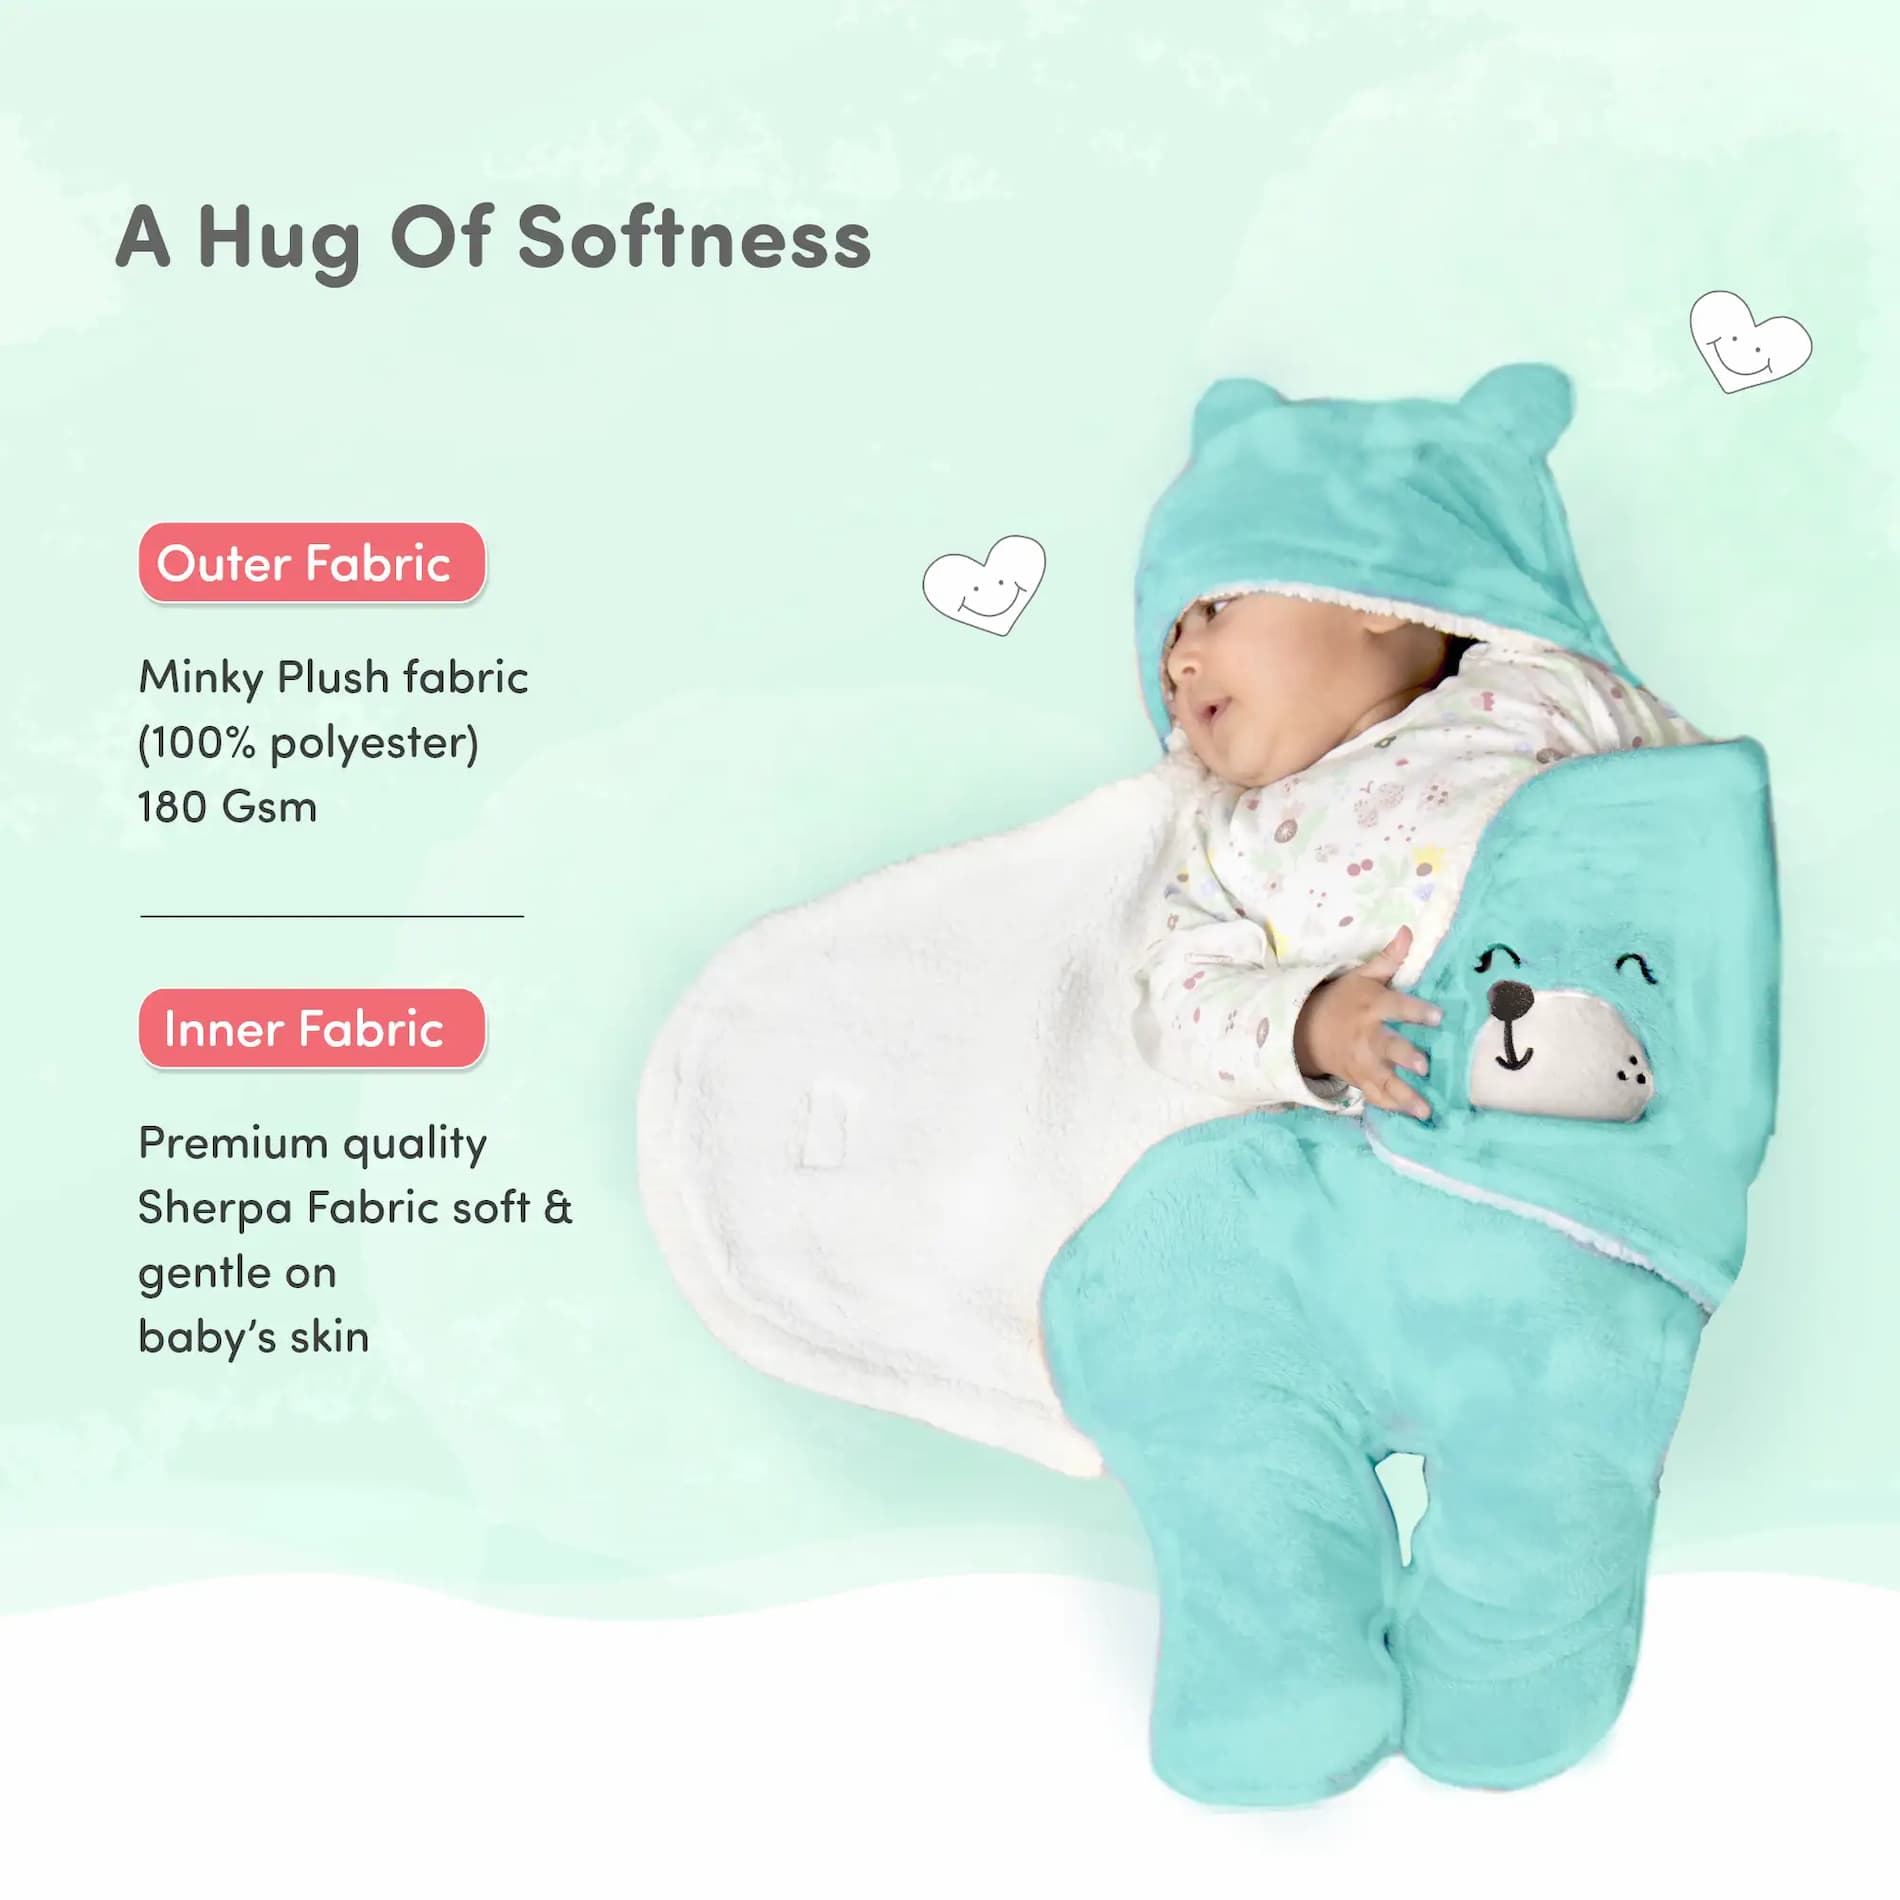 Baby Wrapper for New Born | Baby Swaddling Wrapper | 4-in-1 All Season AC Blanket cum Sleeping Bag for Baby 0-6 Months - Light Pink, Light Brown & Mint Green